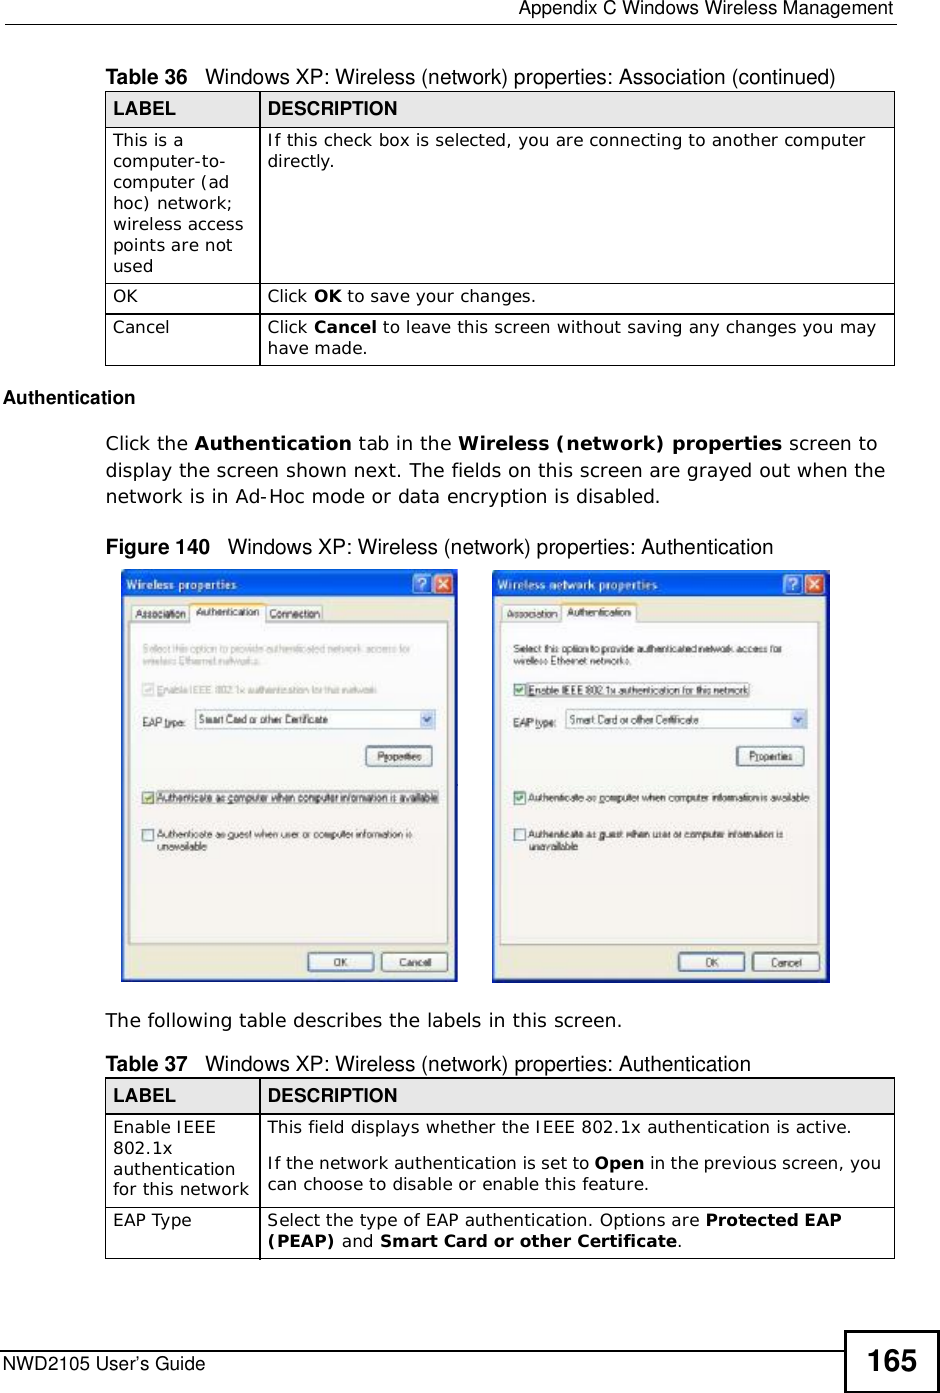  Appendix CWindows Wireless ManagementNWD2105 User’s Guide 165AuthenticationClick the Authentication tab in the Wireless (network) properties screen to display the screen shown next. The fields on this screen are grayed out when the network is in Ad-Hoc mode or data encryption is disabled.Figure 140   Windows XP: Wireless (network) properties: AuthenticationThe following table describes the labels in this screen.This is a computer-to-computer (ad hoc) network; wireless access points are not usedIf this check box is selected, you are connecting to another computer directly.OKClick OK to save your changes.CancelClick Cancel to leave this screen without saving any changes you may have made.Table 36   Windows XP: Wireless (network) properties: Association (continued)LABEL DESCRIPTIONTable 37   Windows XP: Wireless (network) properties: AuthenticationLABEL DESCRIPTIONEnable IEEE 802.1x authentication for this networkThis field displays whether the IEEE 802.1x authentication is active.If the network authentication is set to Open in the previous screen, you can choose to disable or enable this feature.EAP TypeSelect the type of EAP authentication. Options are Protected EAP (PEAP) and Smart Card or other Certificate.